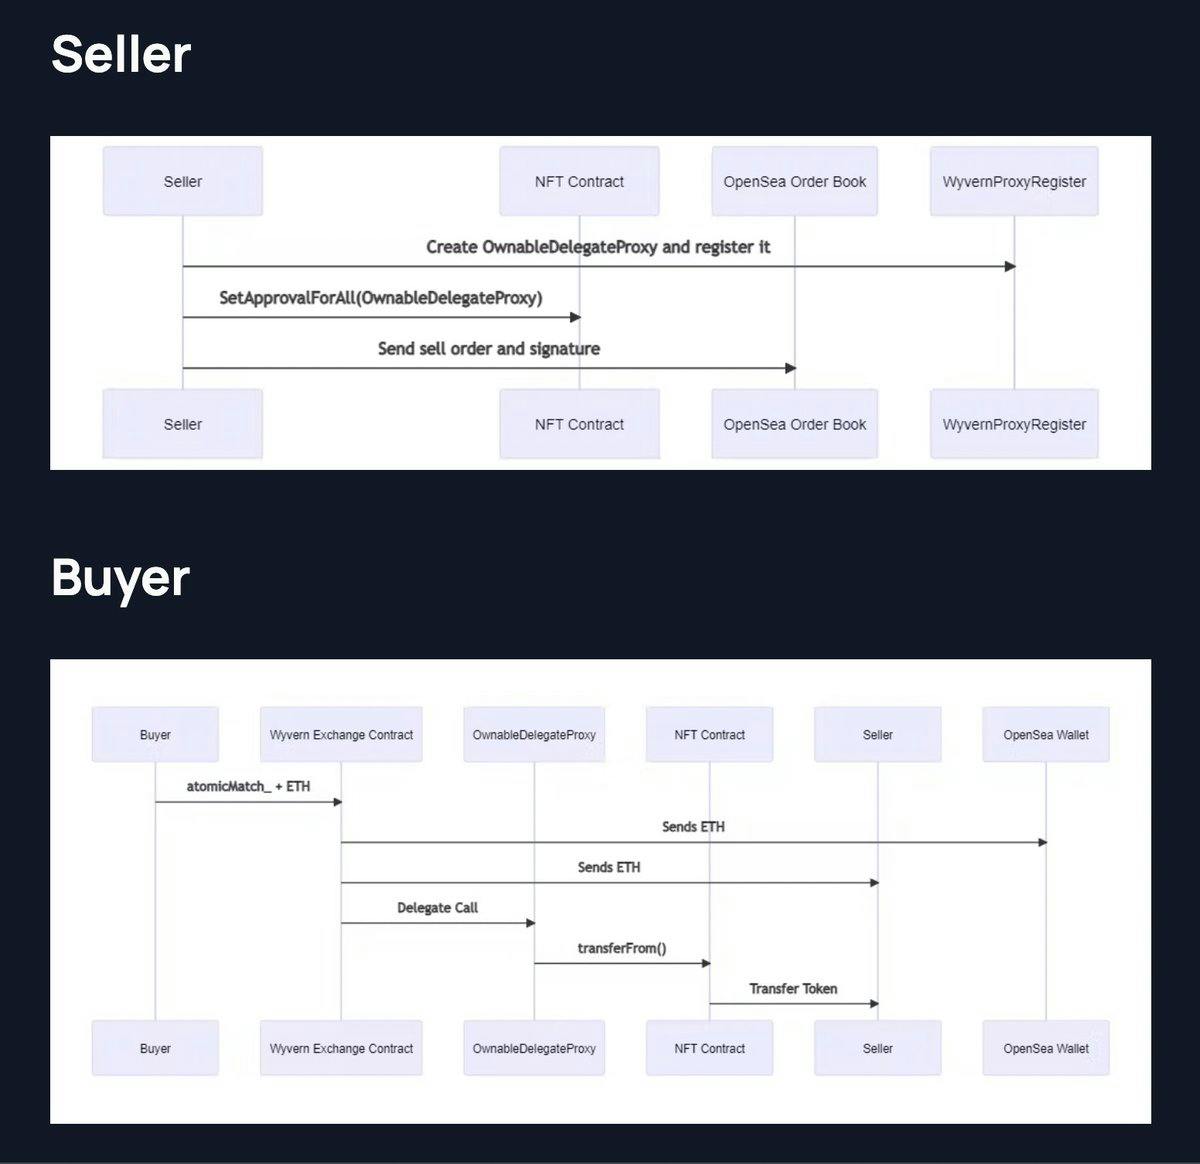 💧 Wyvern on the OpenSea - How The OpenSea Exchange Works by @developer_dao member @M57C 

This article will give you an overview of all the steps buyers and sellers go through to transact on OpenSea and its technology.

<a style='color: rgb(29,161,242); font-weight:normal; text-decoration: none' href='https://blog.developerdao.com/wyvern-on-the-opensea' target='_blank'>blog.developerdao.com/wyvern-on-the-…</a> 